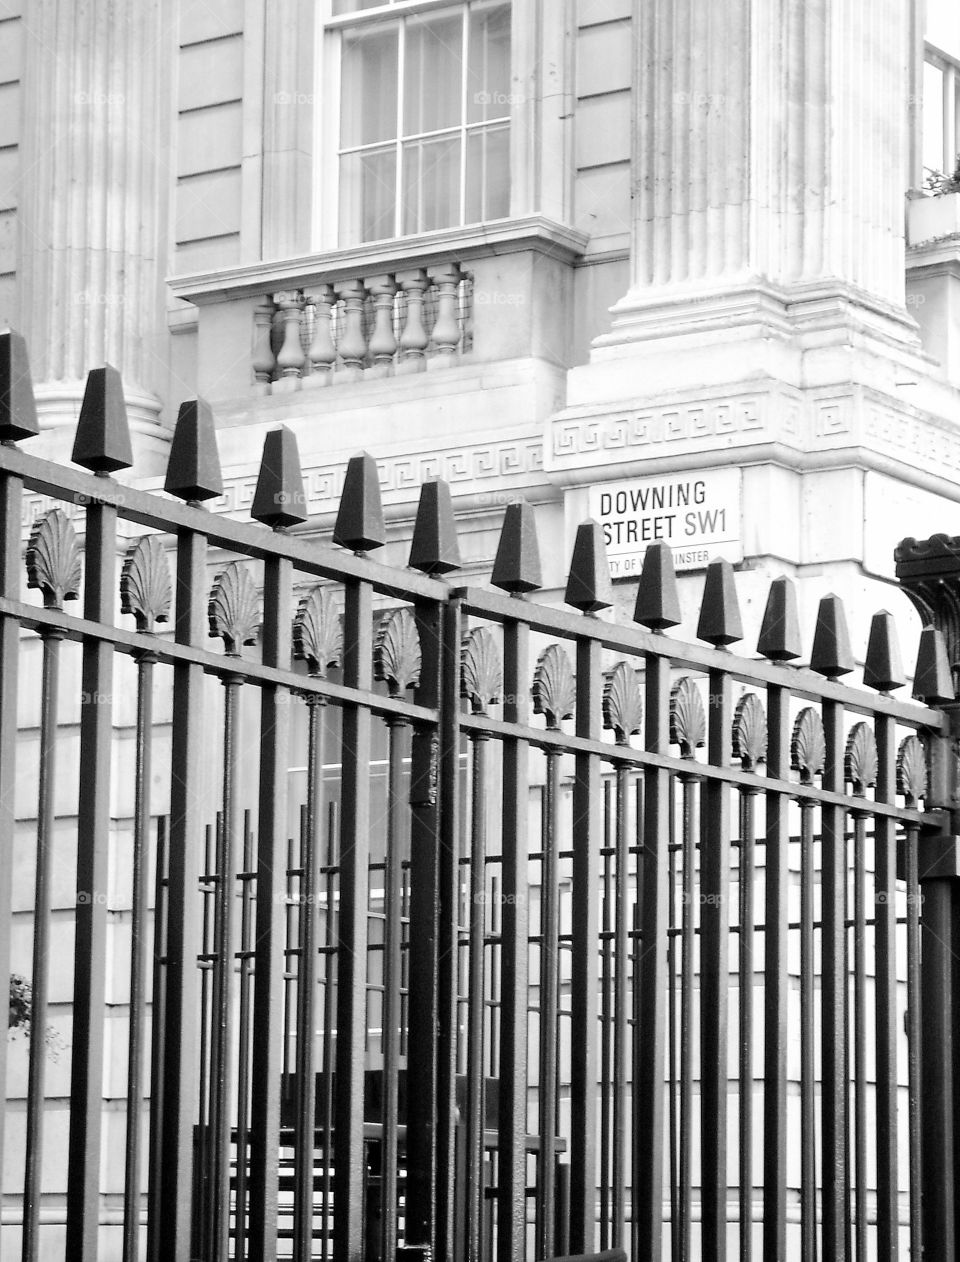 Iron fence and building. Photo taken on London on Downing Street.  Black and white.